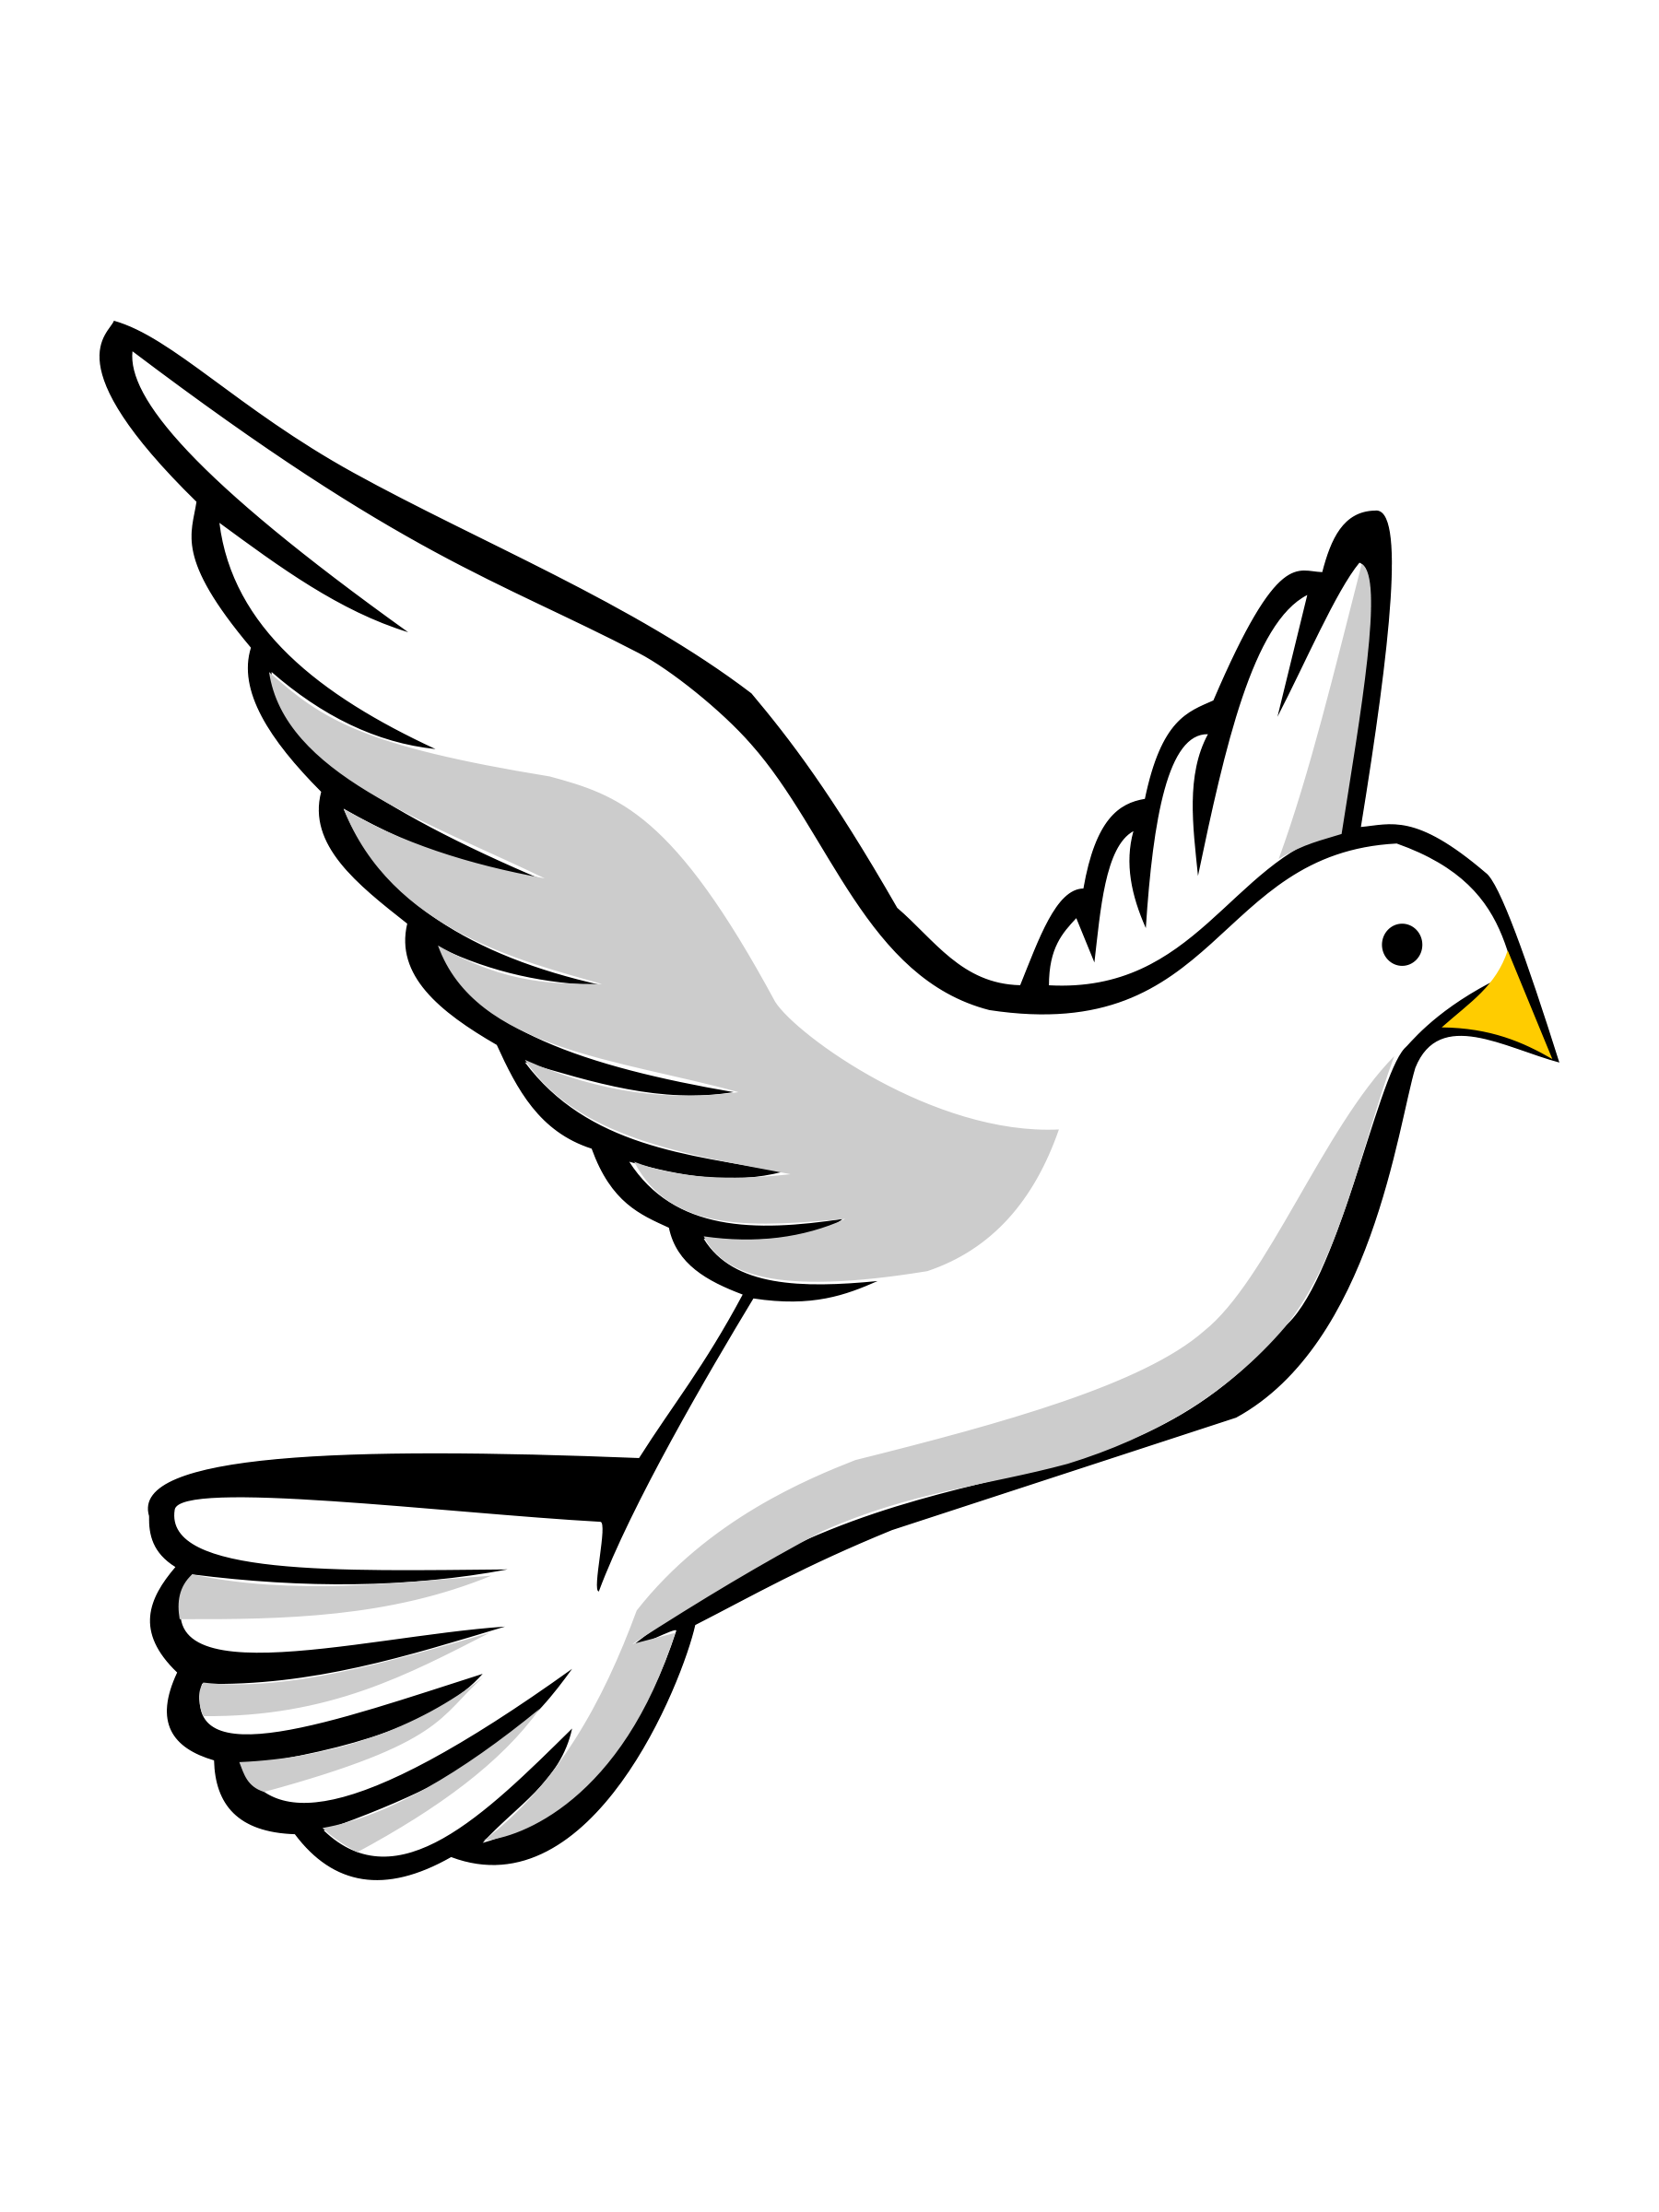 White Pigeon PNG Free Download